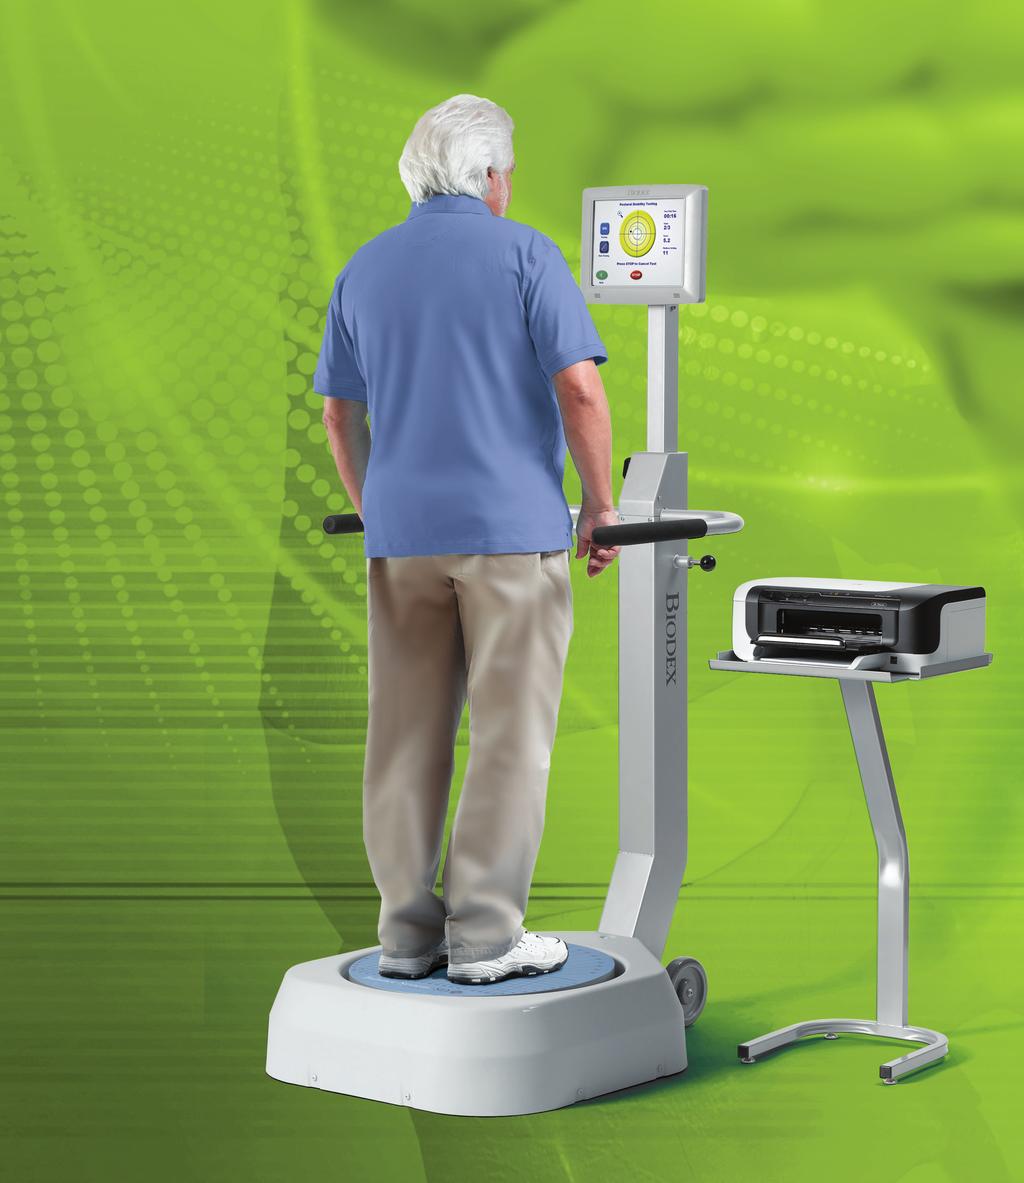 Unique features of the Biodex Balance System SD Platform the technologic heart of the Biodex Balance System is an instrumented platform offering 12 dynamic levels for assessment and training of